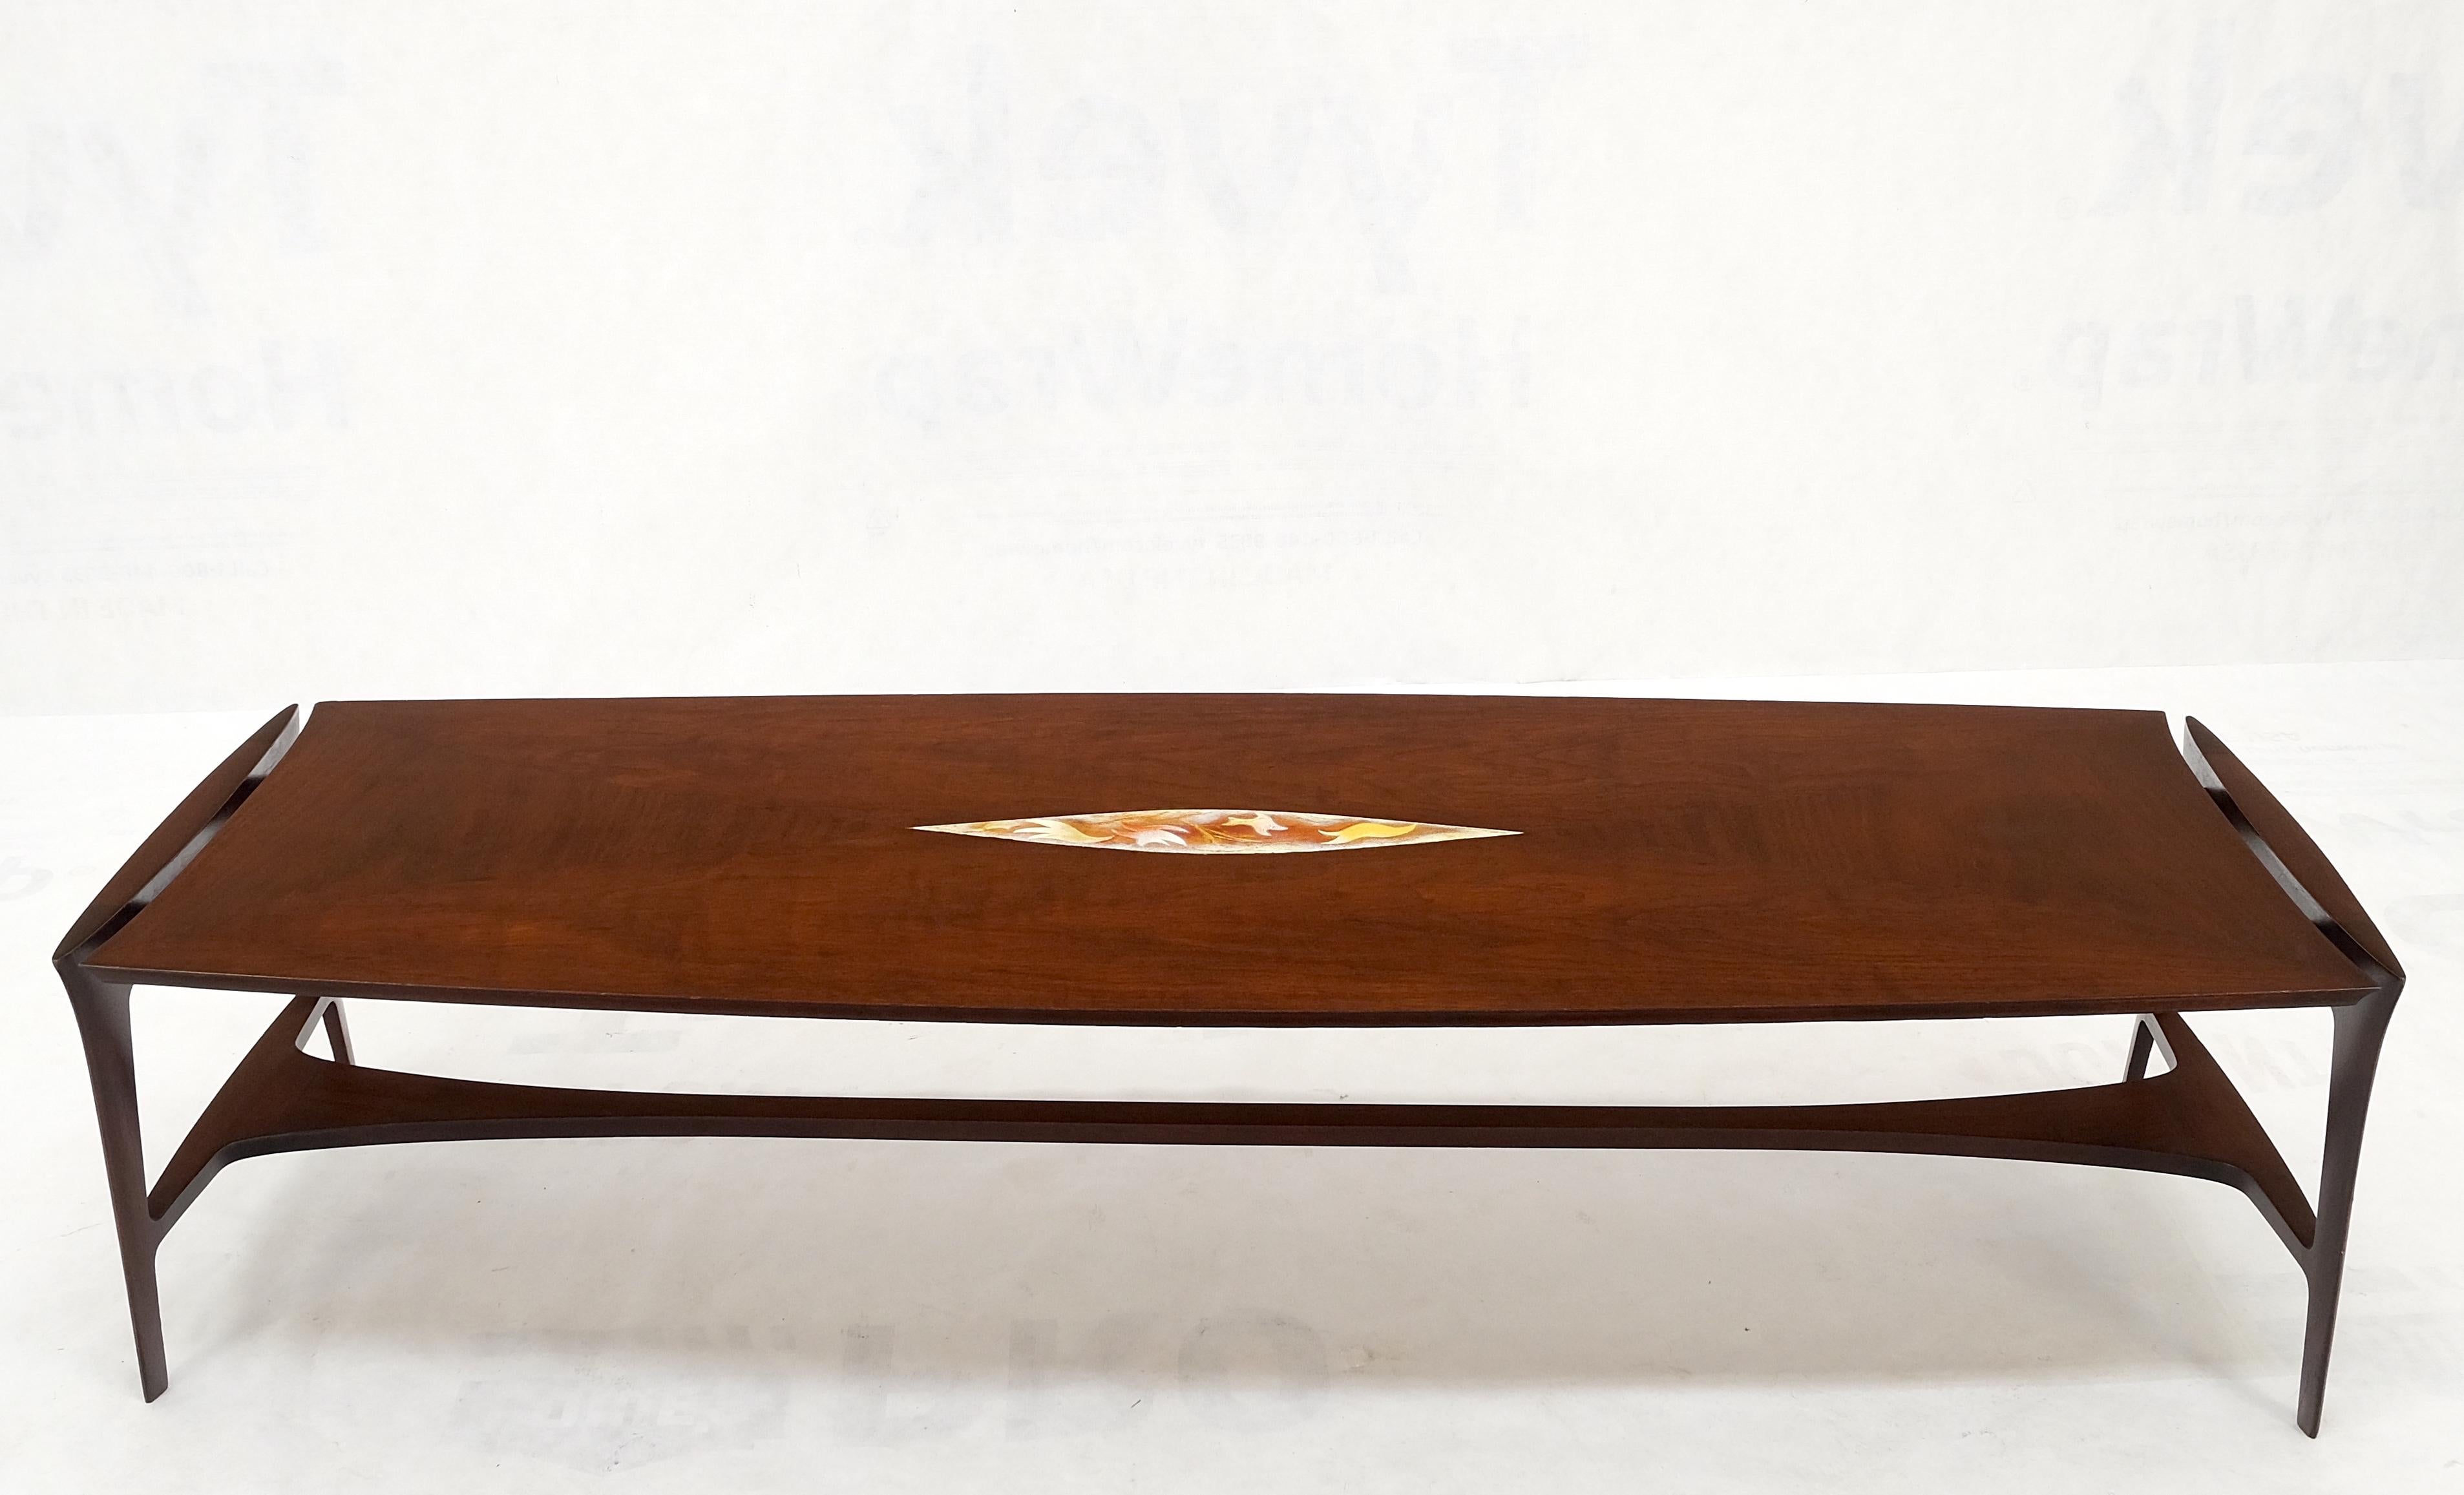 Oiled Walnut Tile Insert Floating Top Mid-Century Long Surfboard Coffee Table For Sale 4